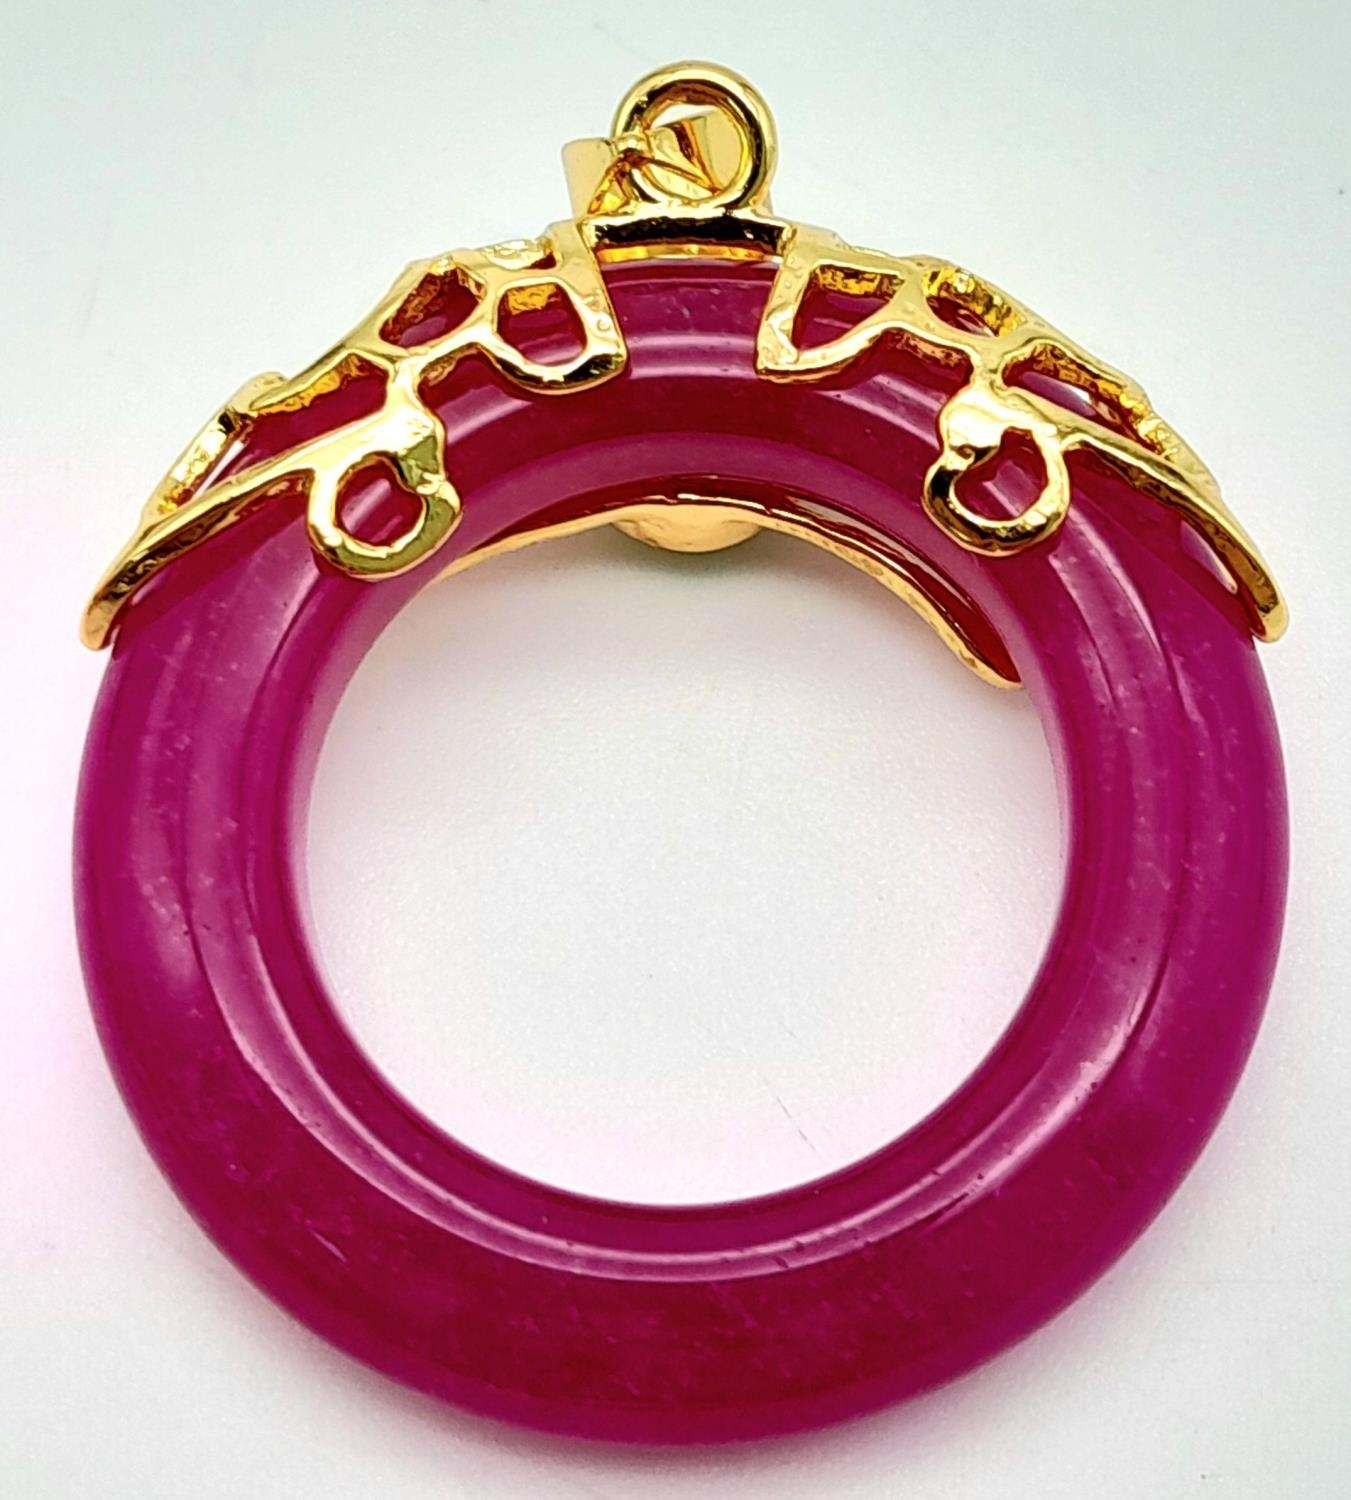 A Magenta Jade Pendant on Gilded Backing. 4cm length, 3cm diameter, 6.79g total weight. - Image 2 of 4